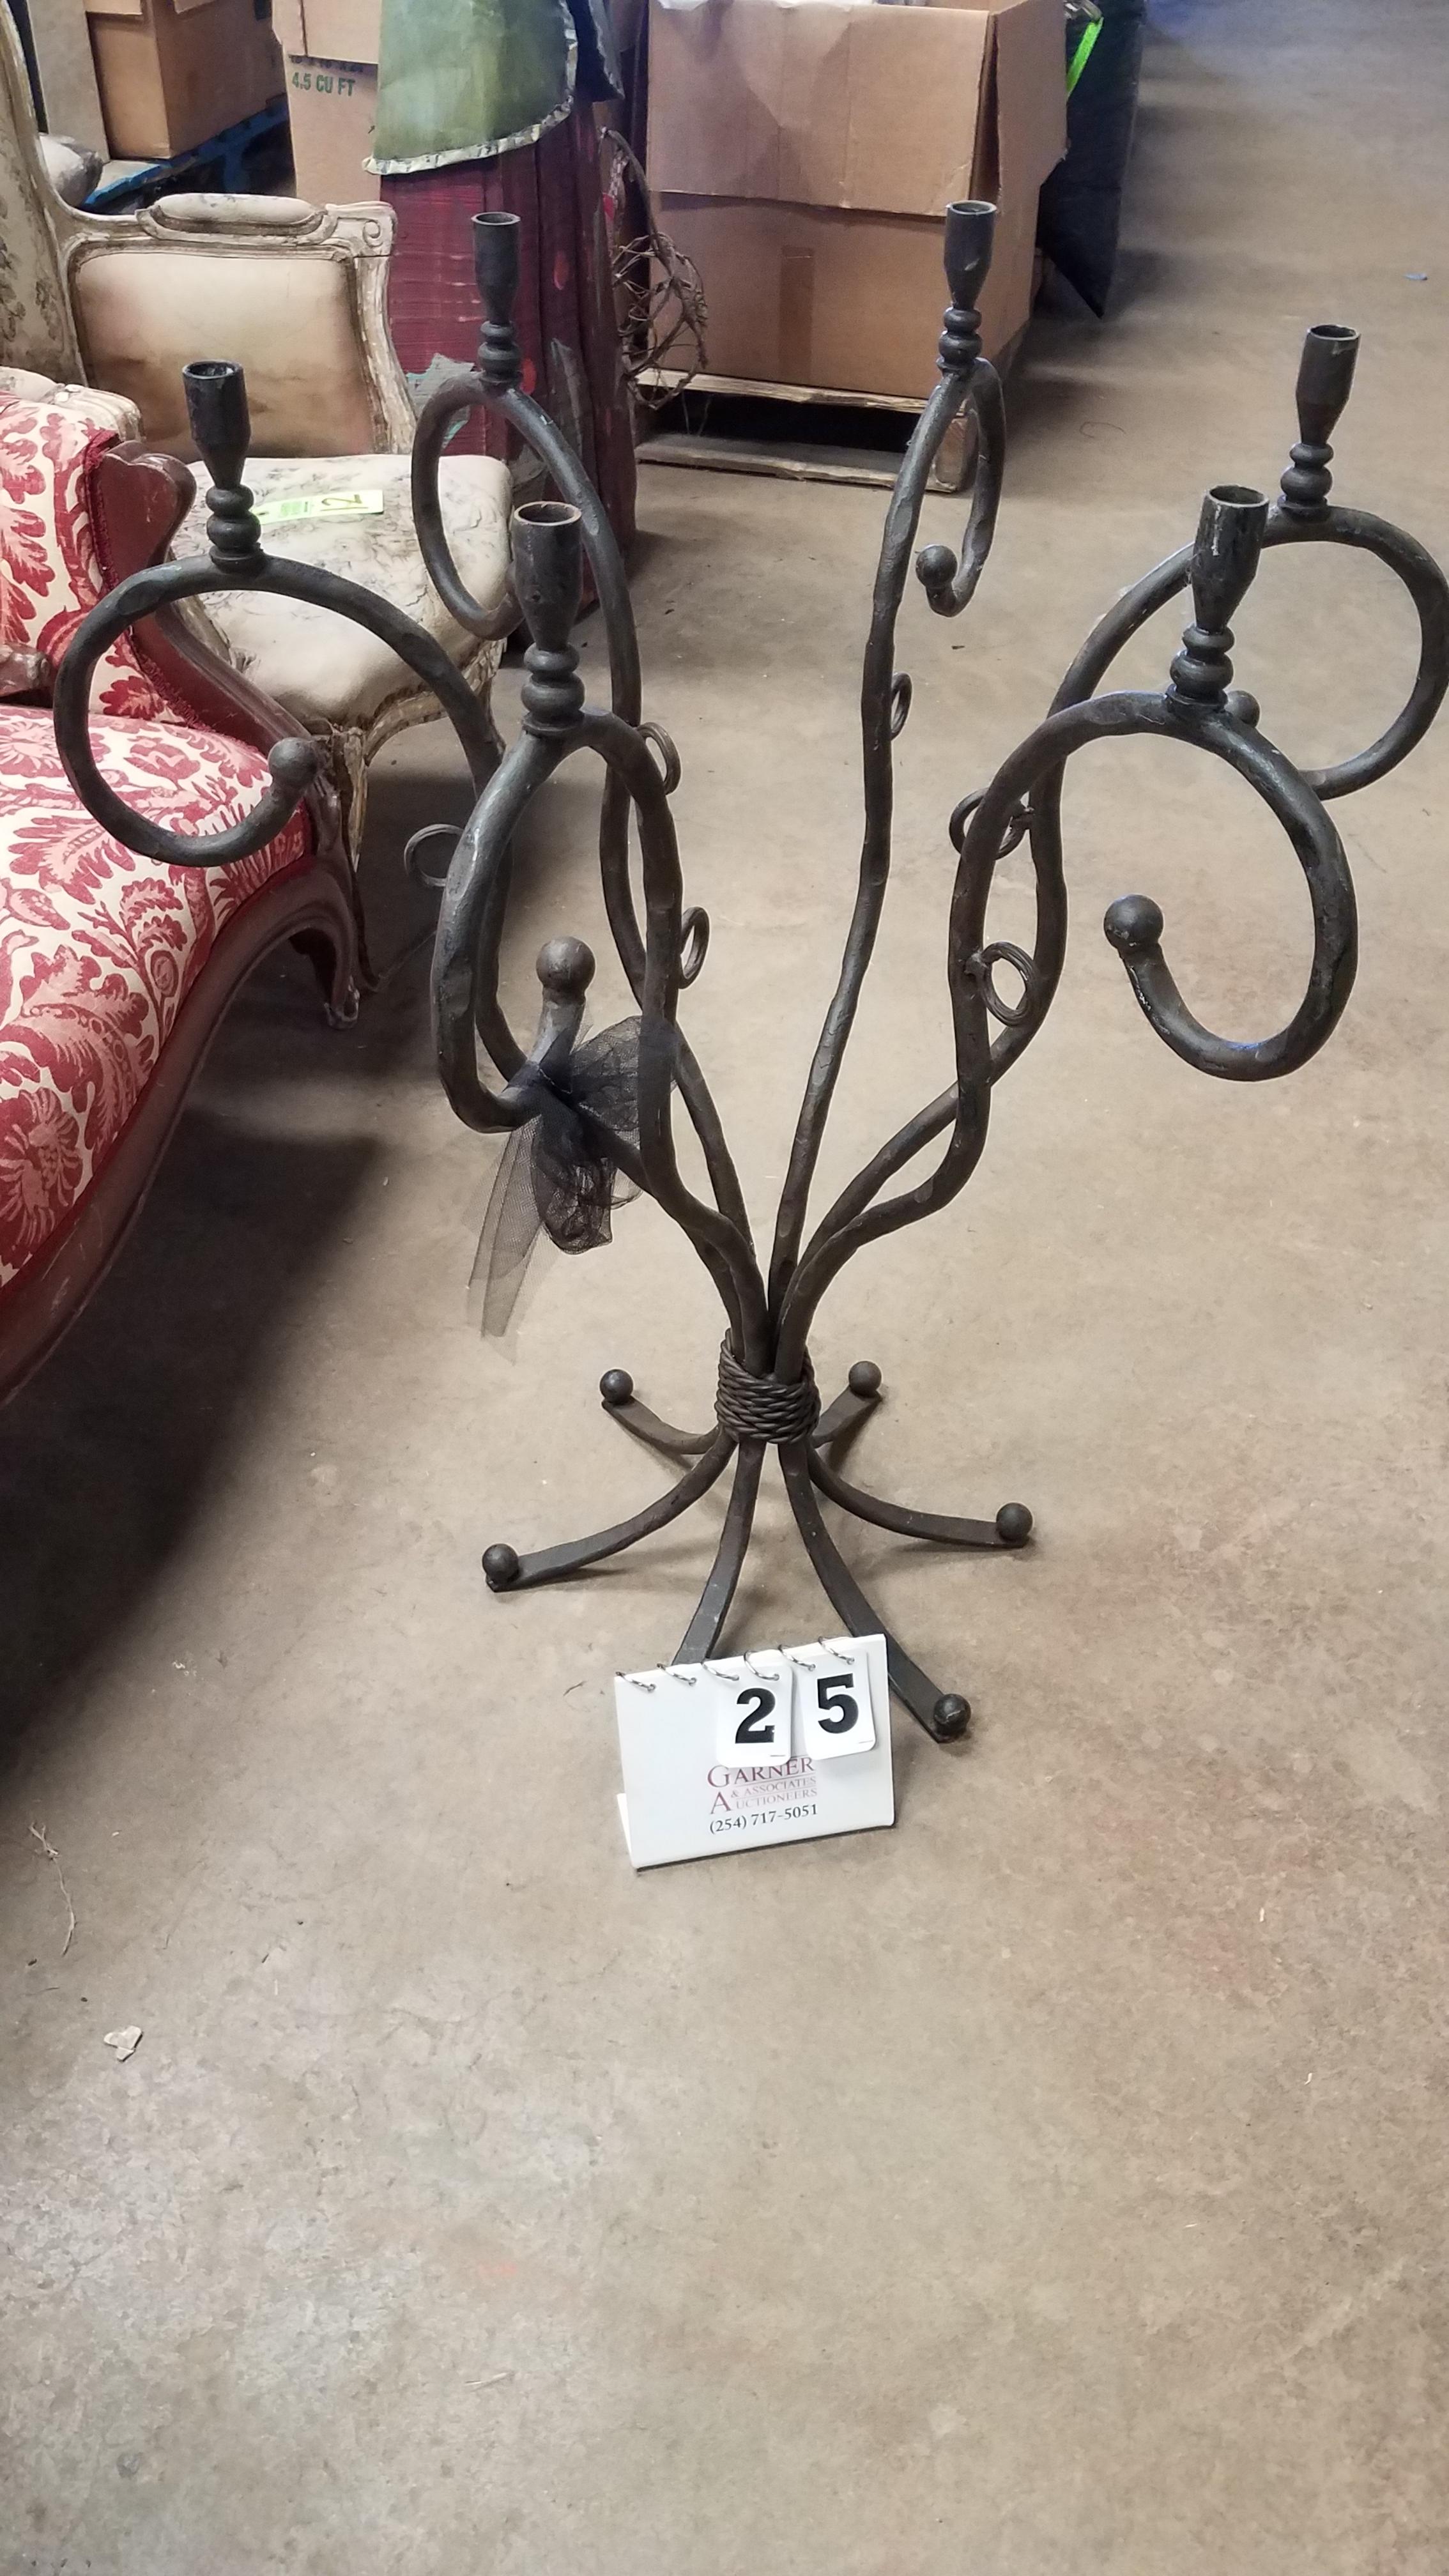 Large Candelabra, 2 Wall Hangings, And Wooden Tray